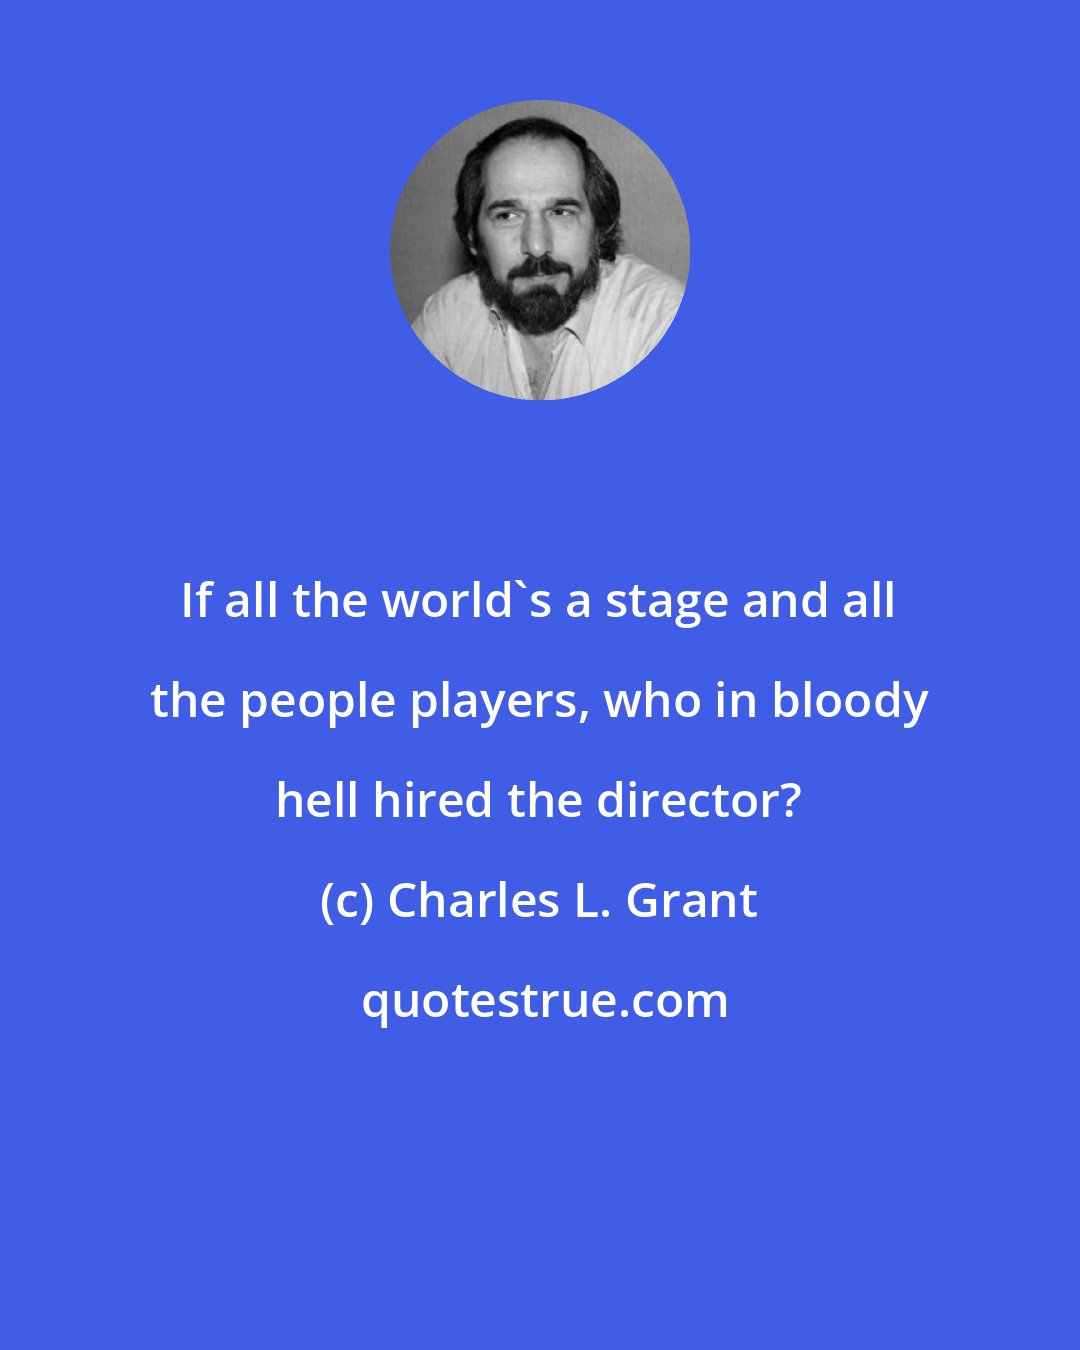 Charles L. Grant: If all the world's a stage and all the people players, who in bloody hell hired the director?